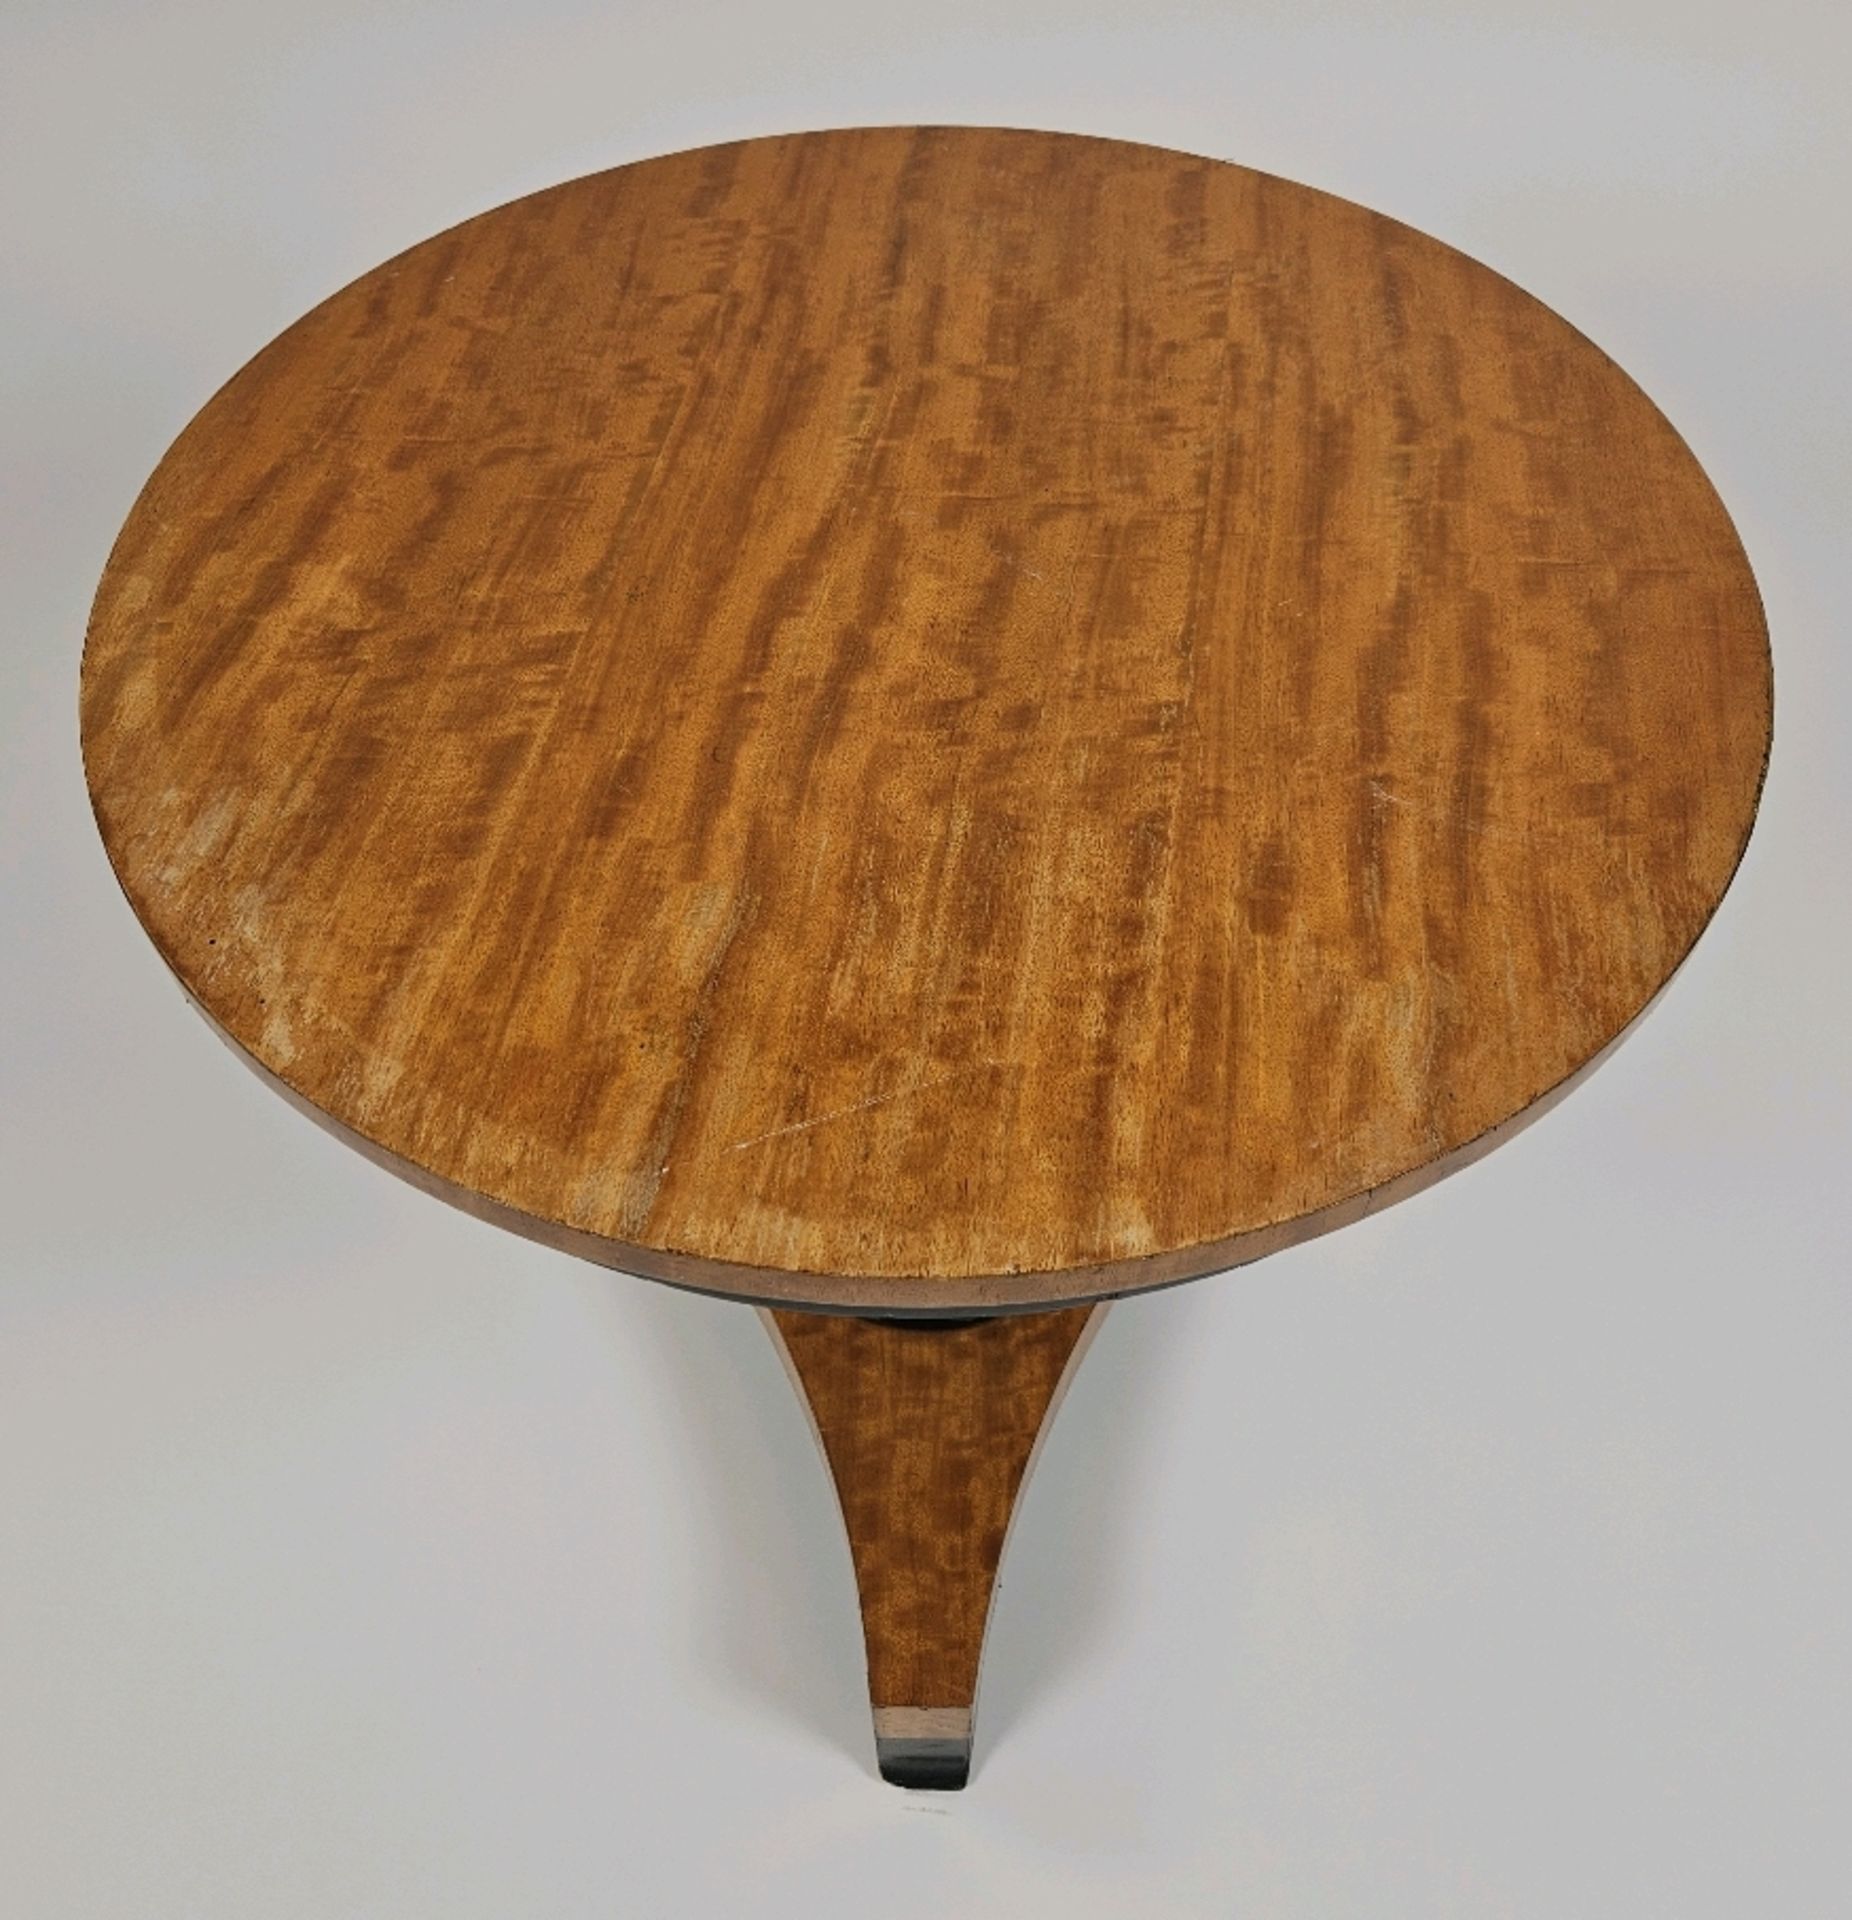 Art Deco Style Pedestal Side Table - Image 3 of 4